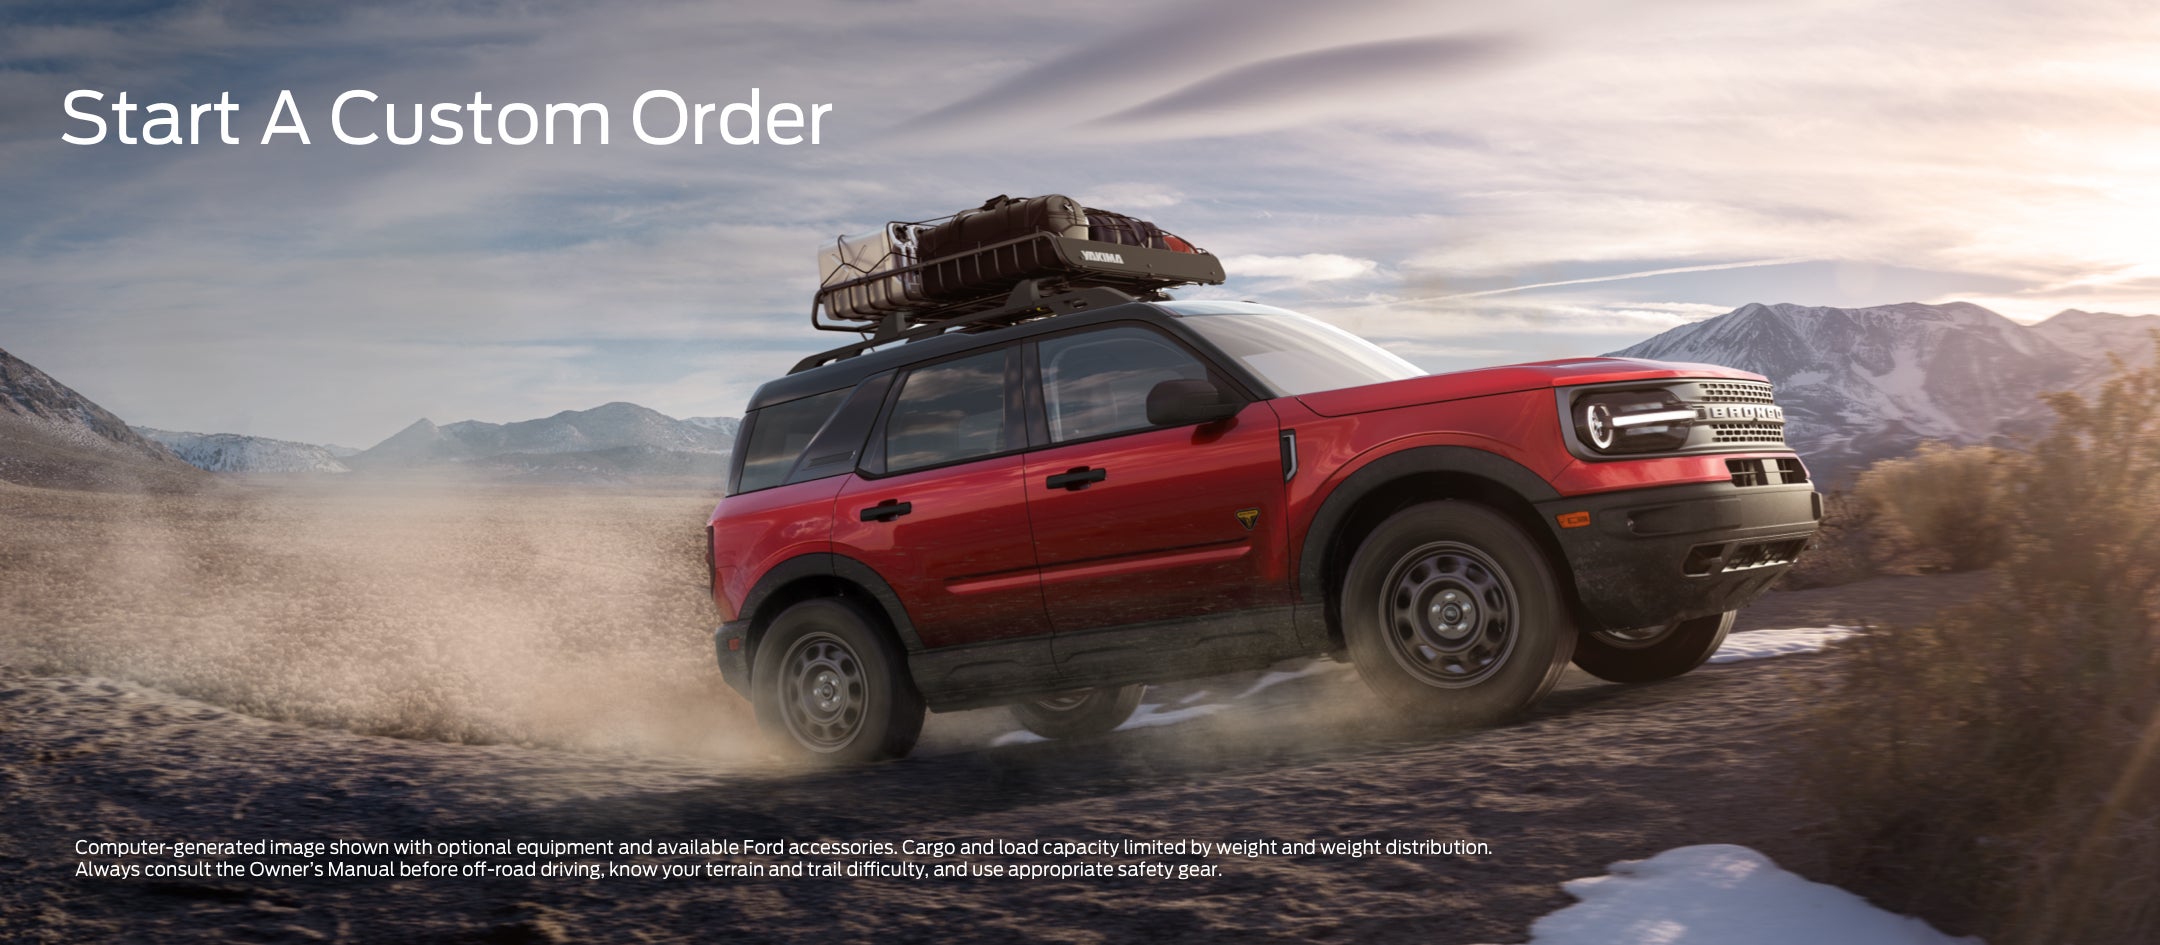 Start a custom order | Dick's Canby Ford in Canby OR